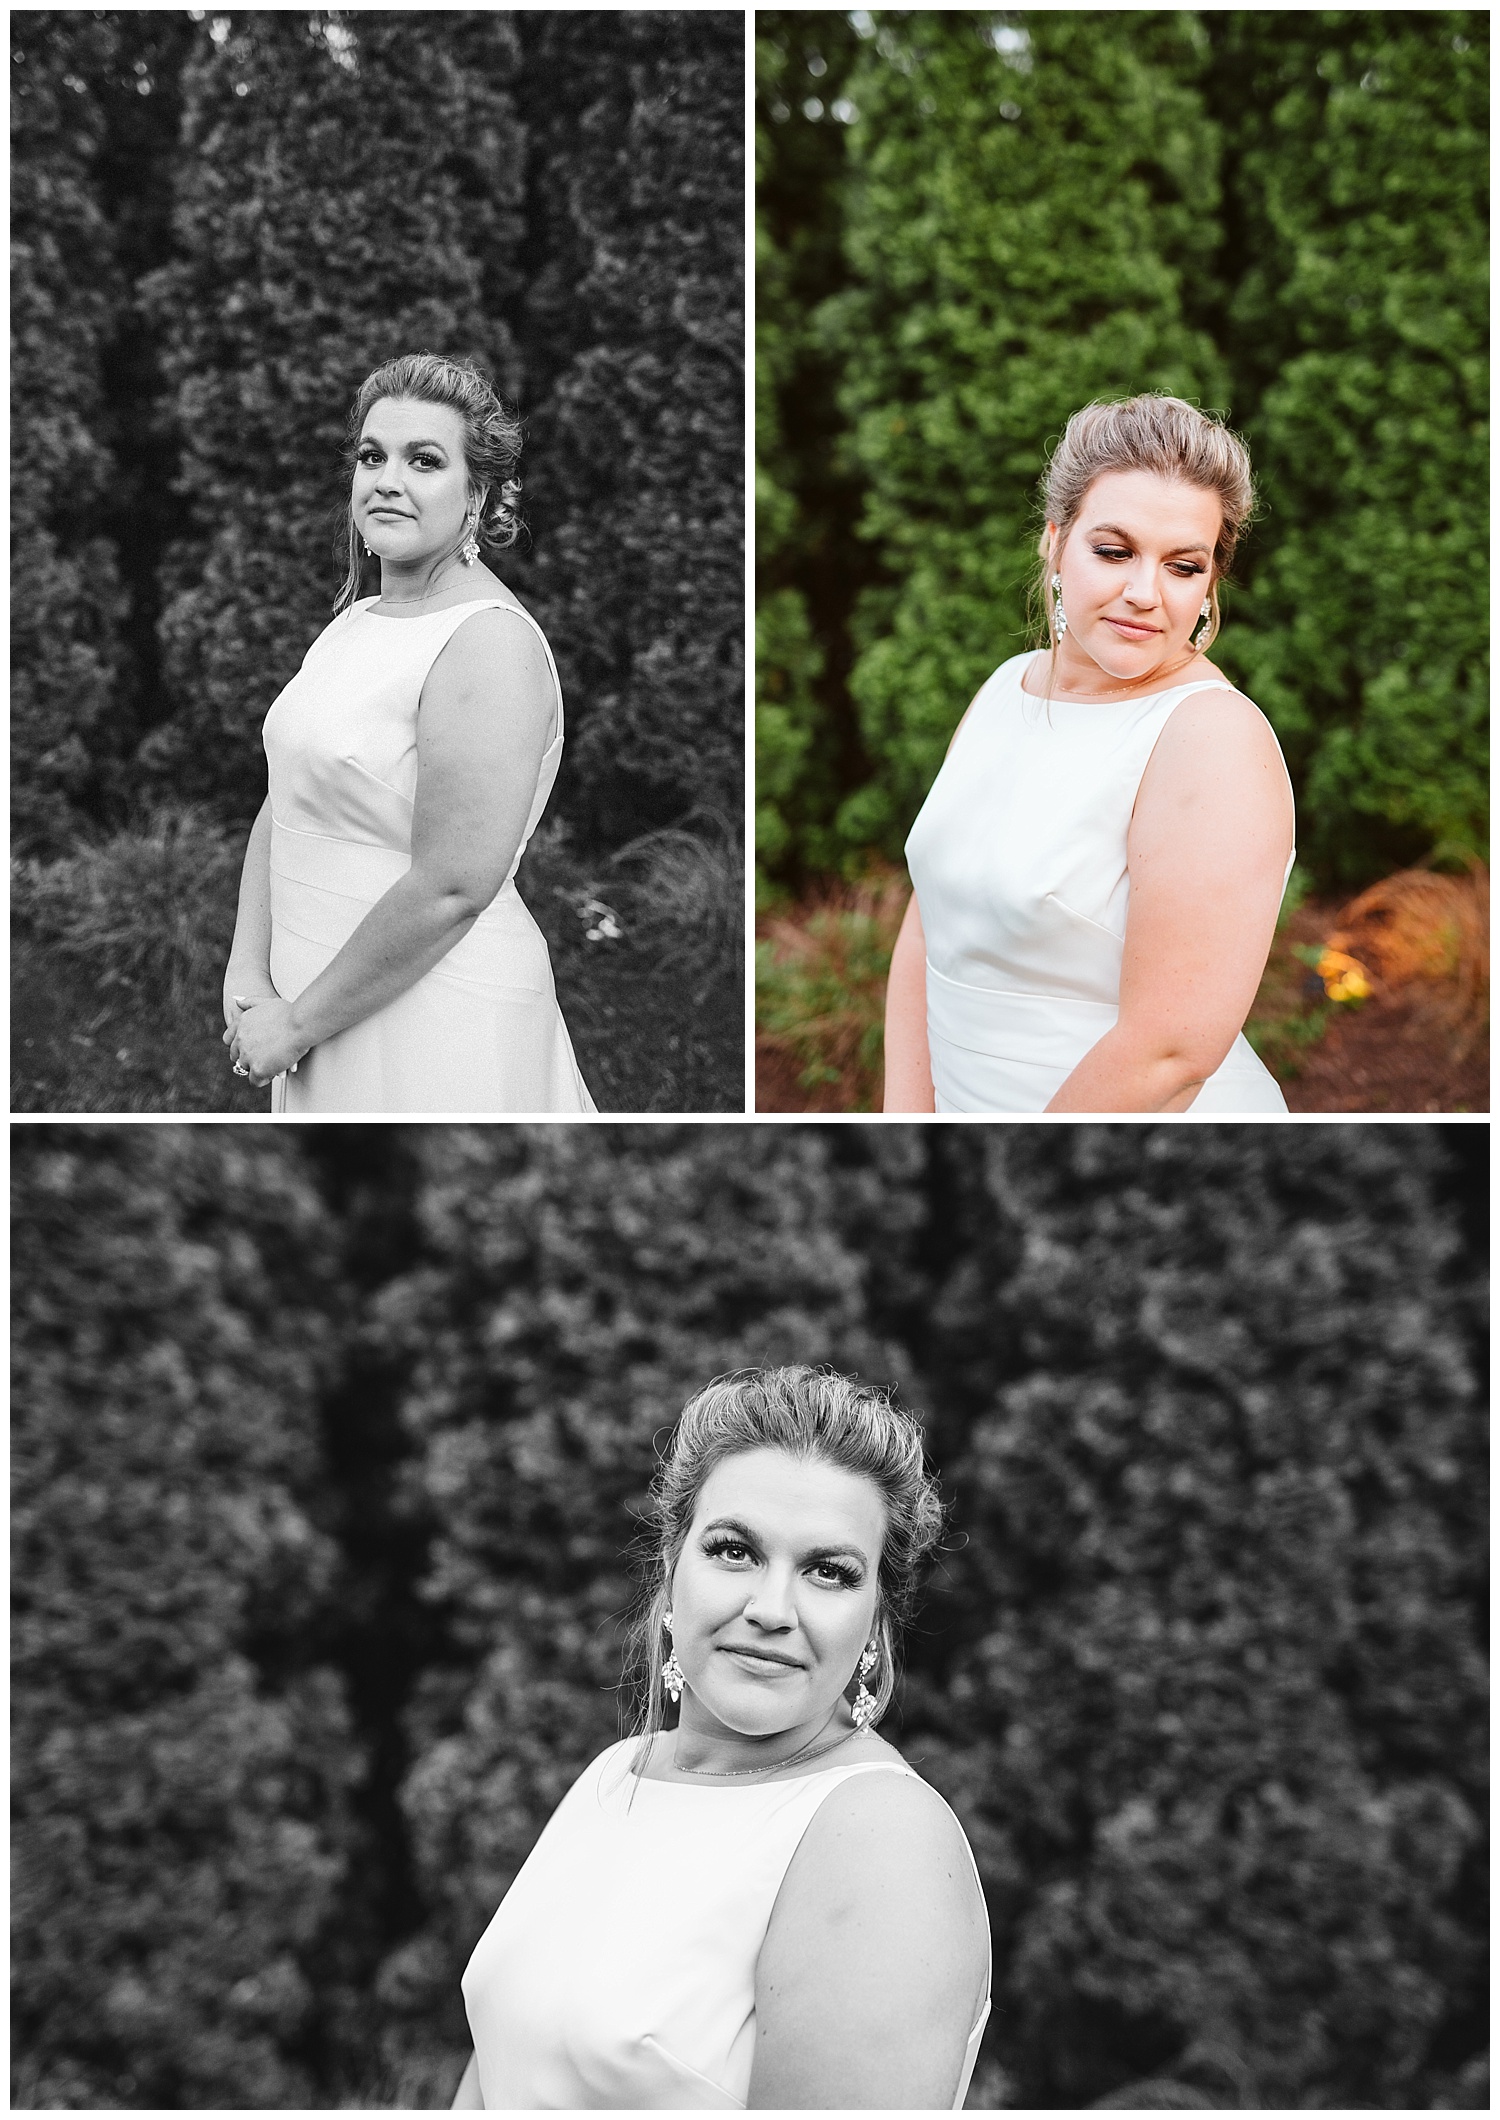 portraits of bride in white dress with updo standing in front of evergreen trees, The Cordelle, Nashville wedding photography, Country Music Hall of Fame wedding reception, Tennessee wedding Planning, Wedding Inspiration, Engagement Inspiration, Downtown Nashville, The Cordelle Nashville, wedding venue